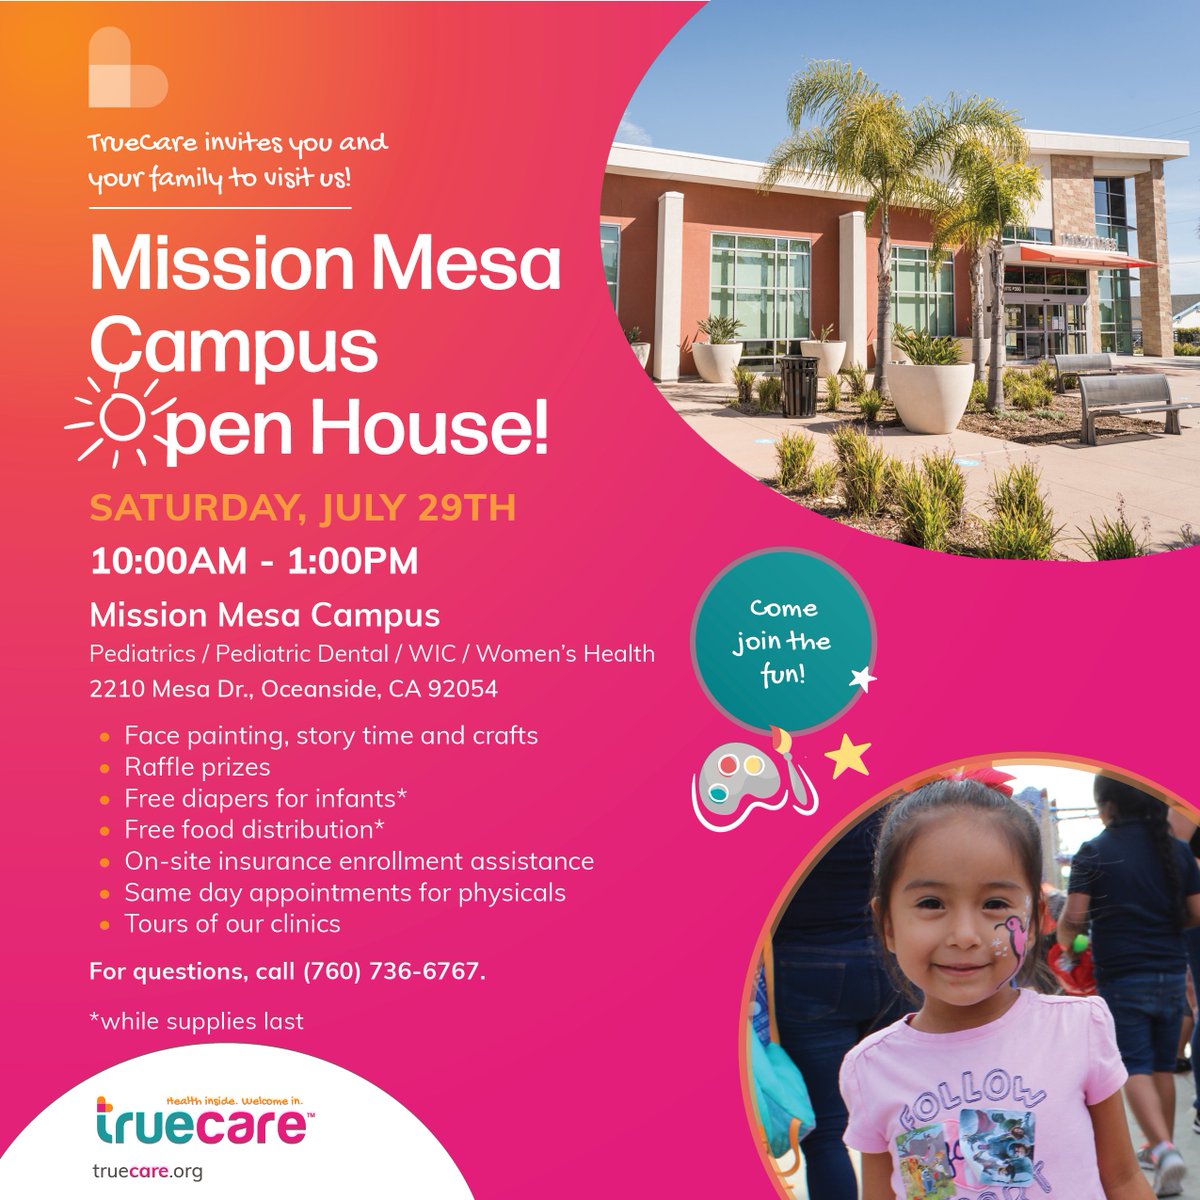 TrueCare invites you and your family to visit TrueCare's Mission Mesa Campus Open House on Saturday, July 29th from 10AM-1PM! Come join the fun!

#HealthcareEvent #CommunityEvent #FamilyFun #HealthcareServices